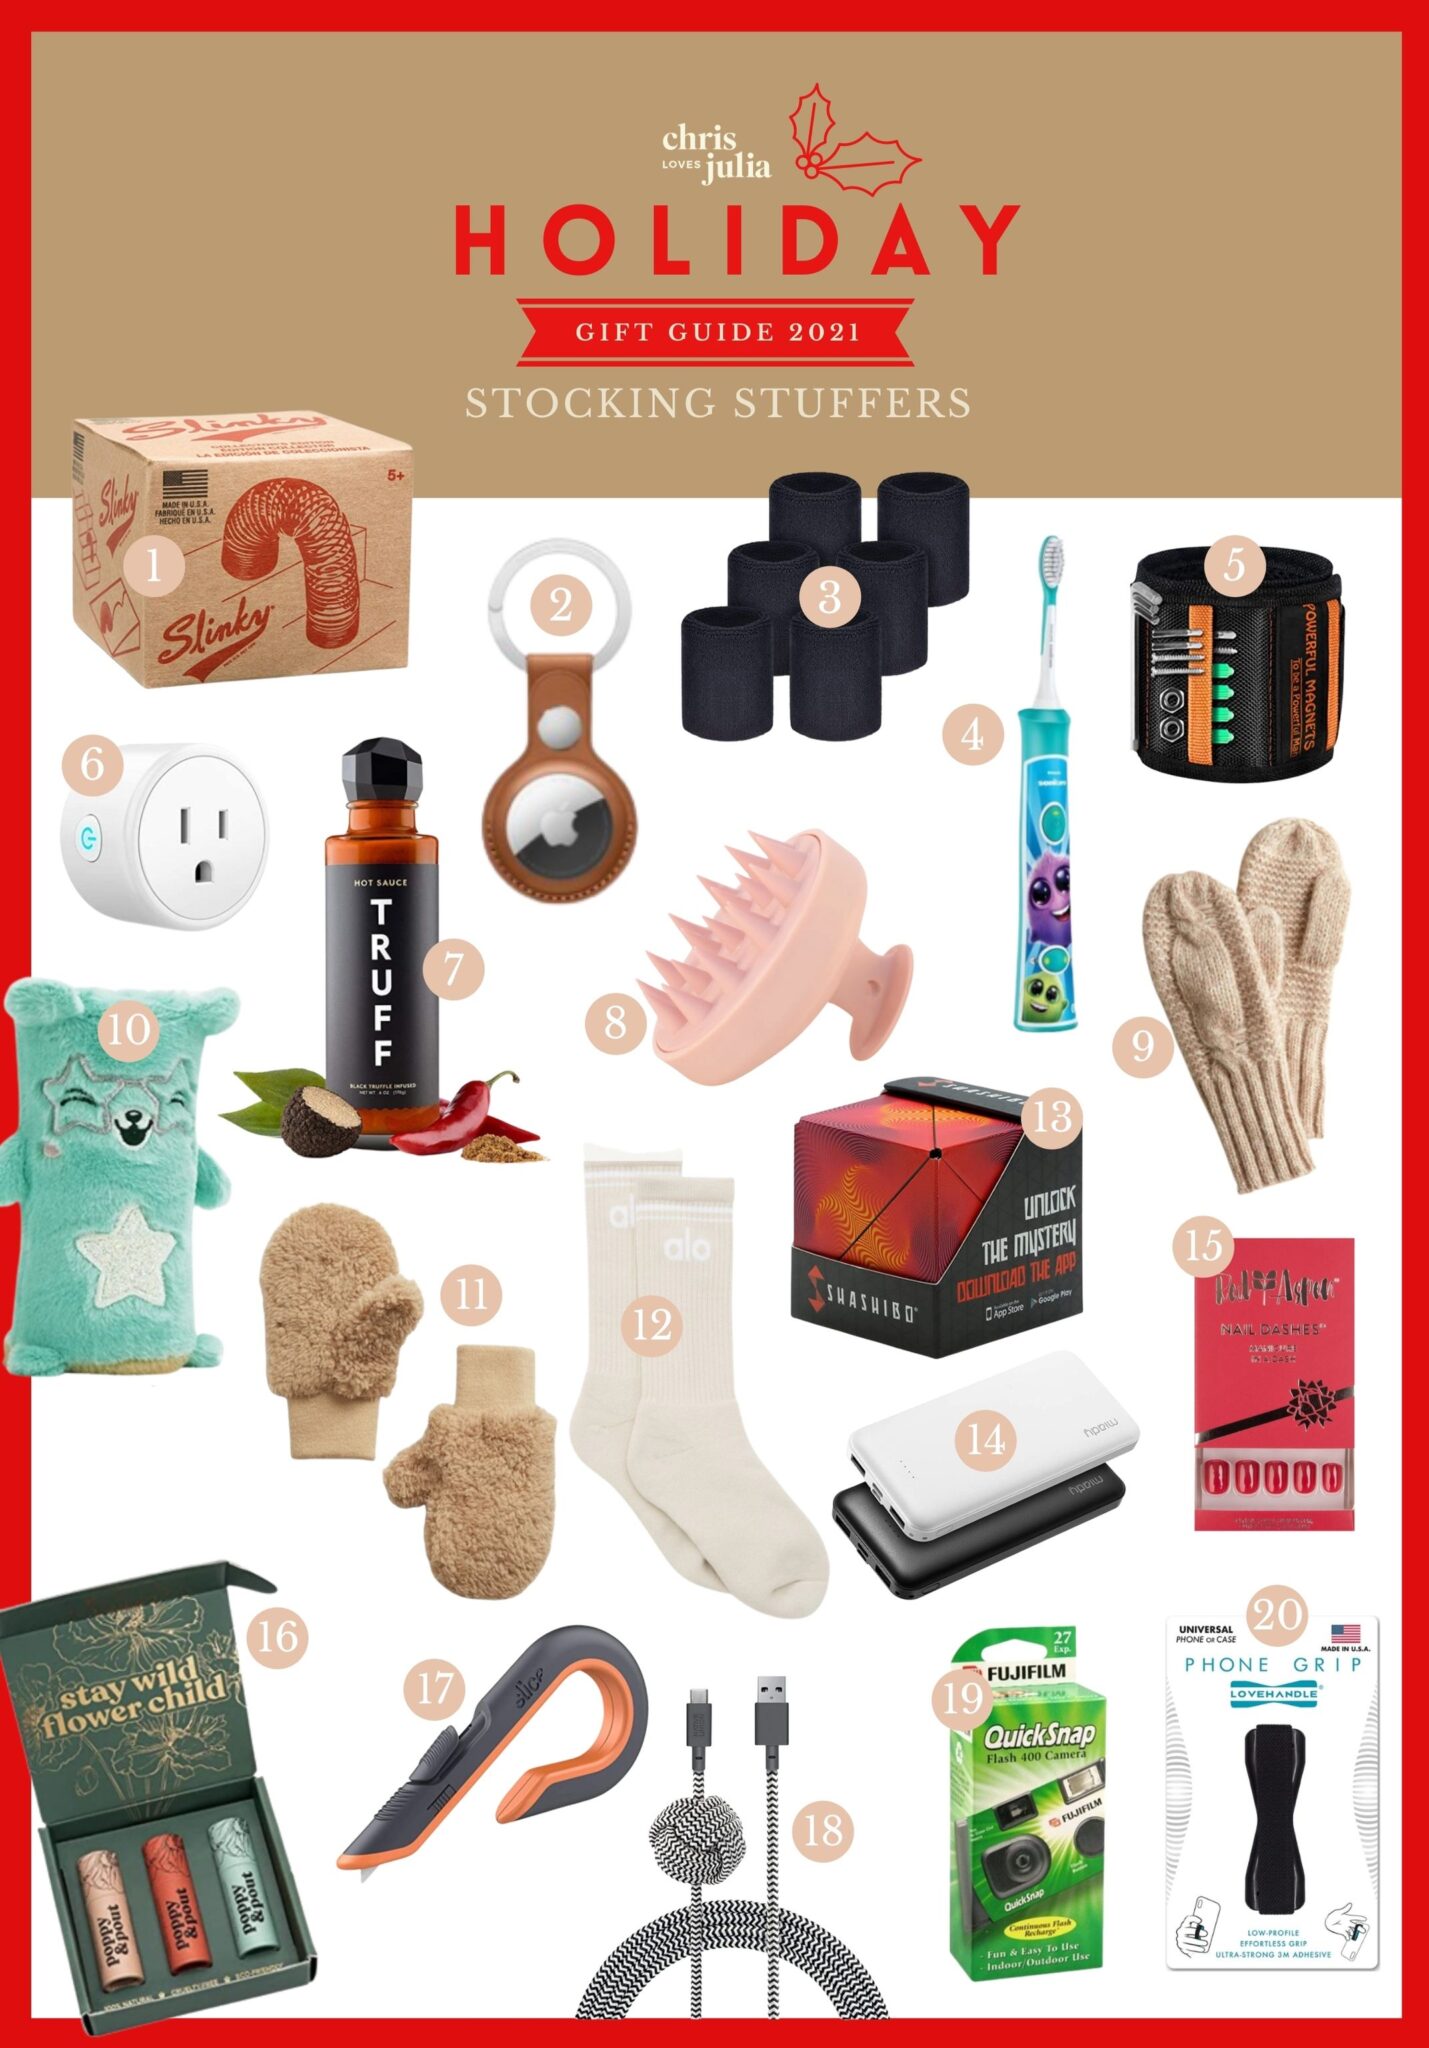 Stocking Stuffer Gift Guides - The Pretty PhD Blog